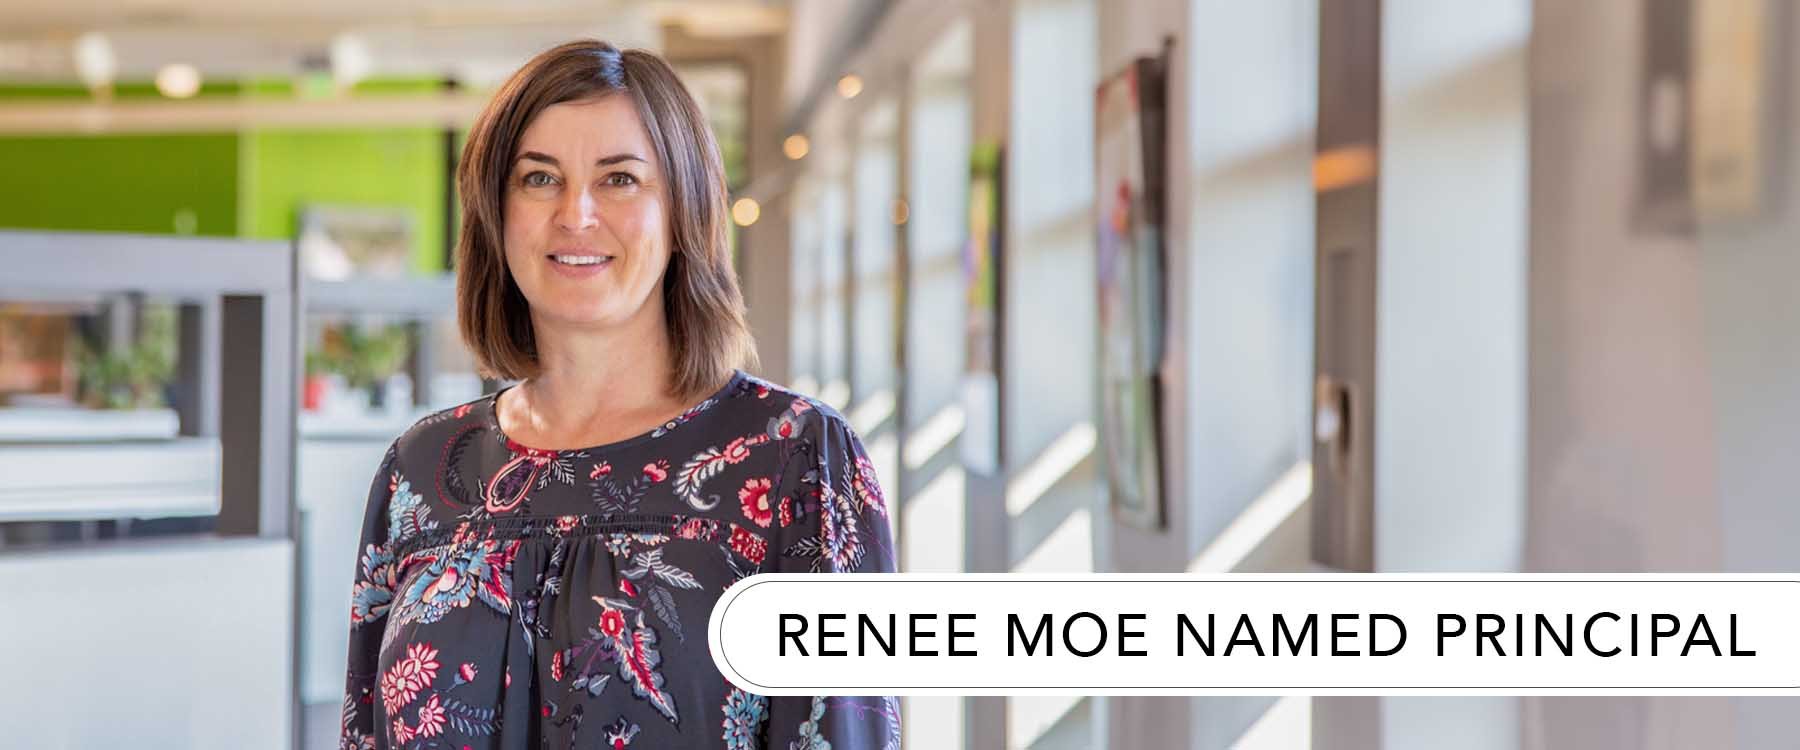 Healthcare architect and dental planner Renee Moe is promoted to Principal at Plunkett Raysich Architects, LLP